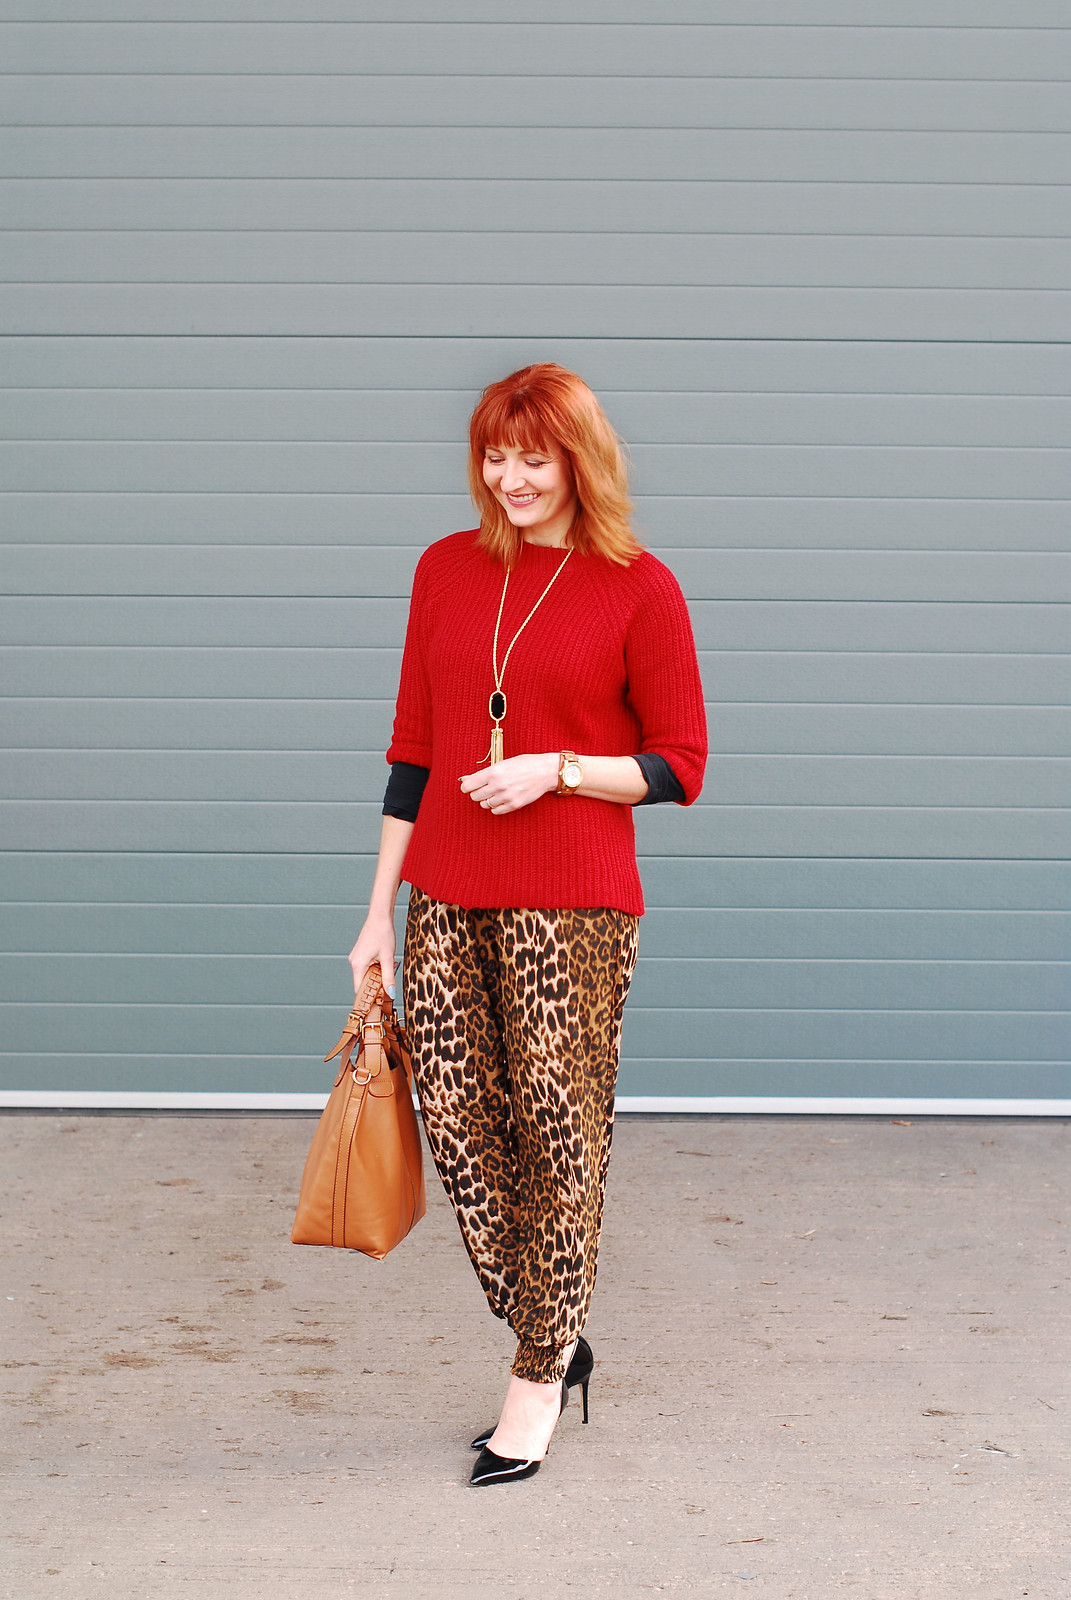 Bold autumn/fall/winter outfit: Red three quarter sleeve sweater, leopard print joggers, pointed black heels | Not Dressed As Lamb